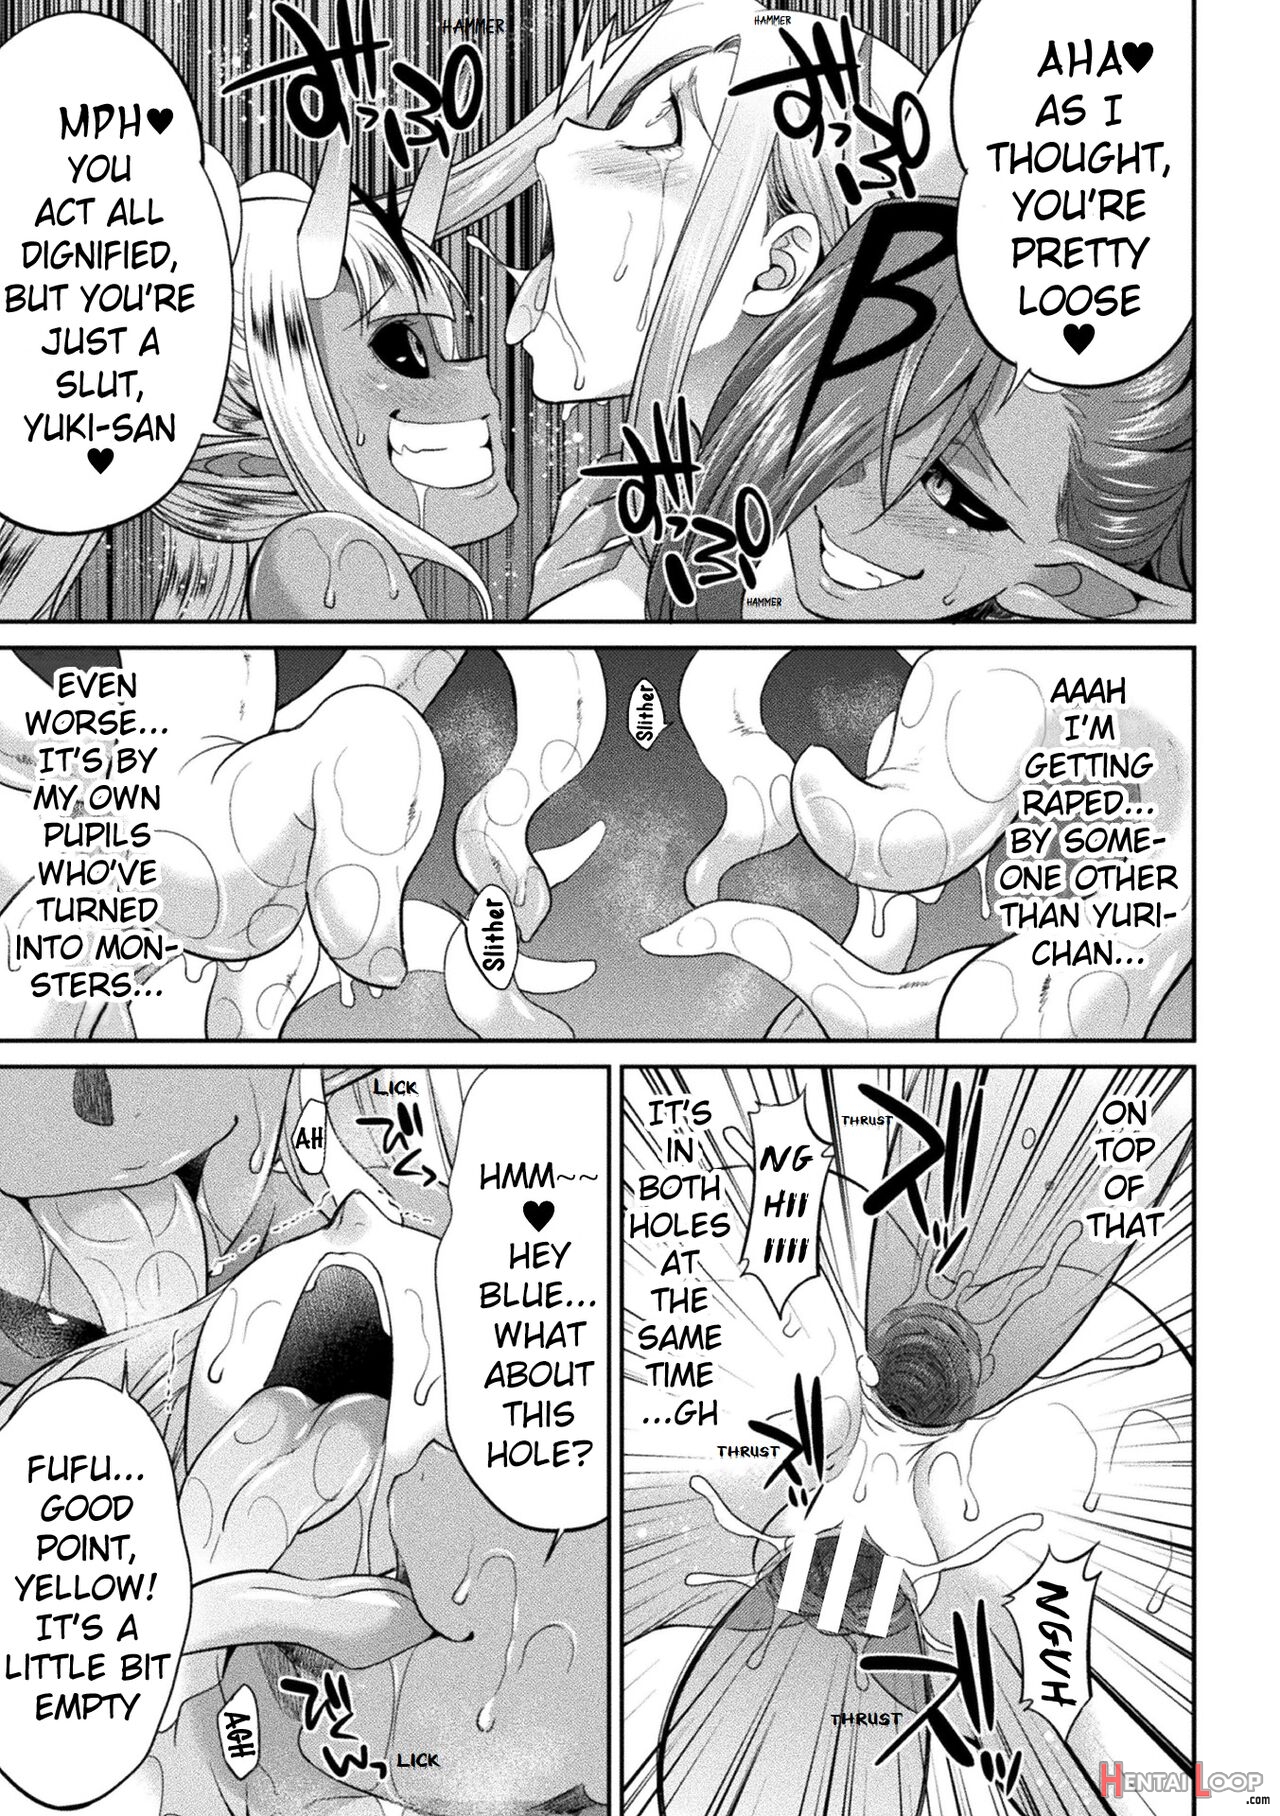 Special Duty Squadron Colorful Force Heroines Of Justice Vs The Tentacle Queen! The Great Battle Of Futa Training!? page 109